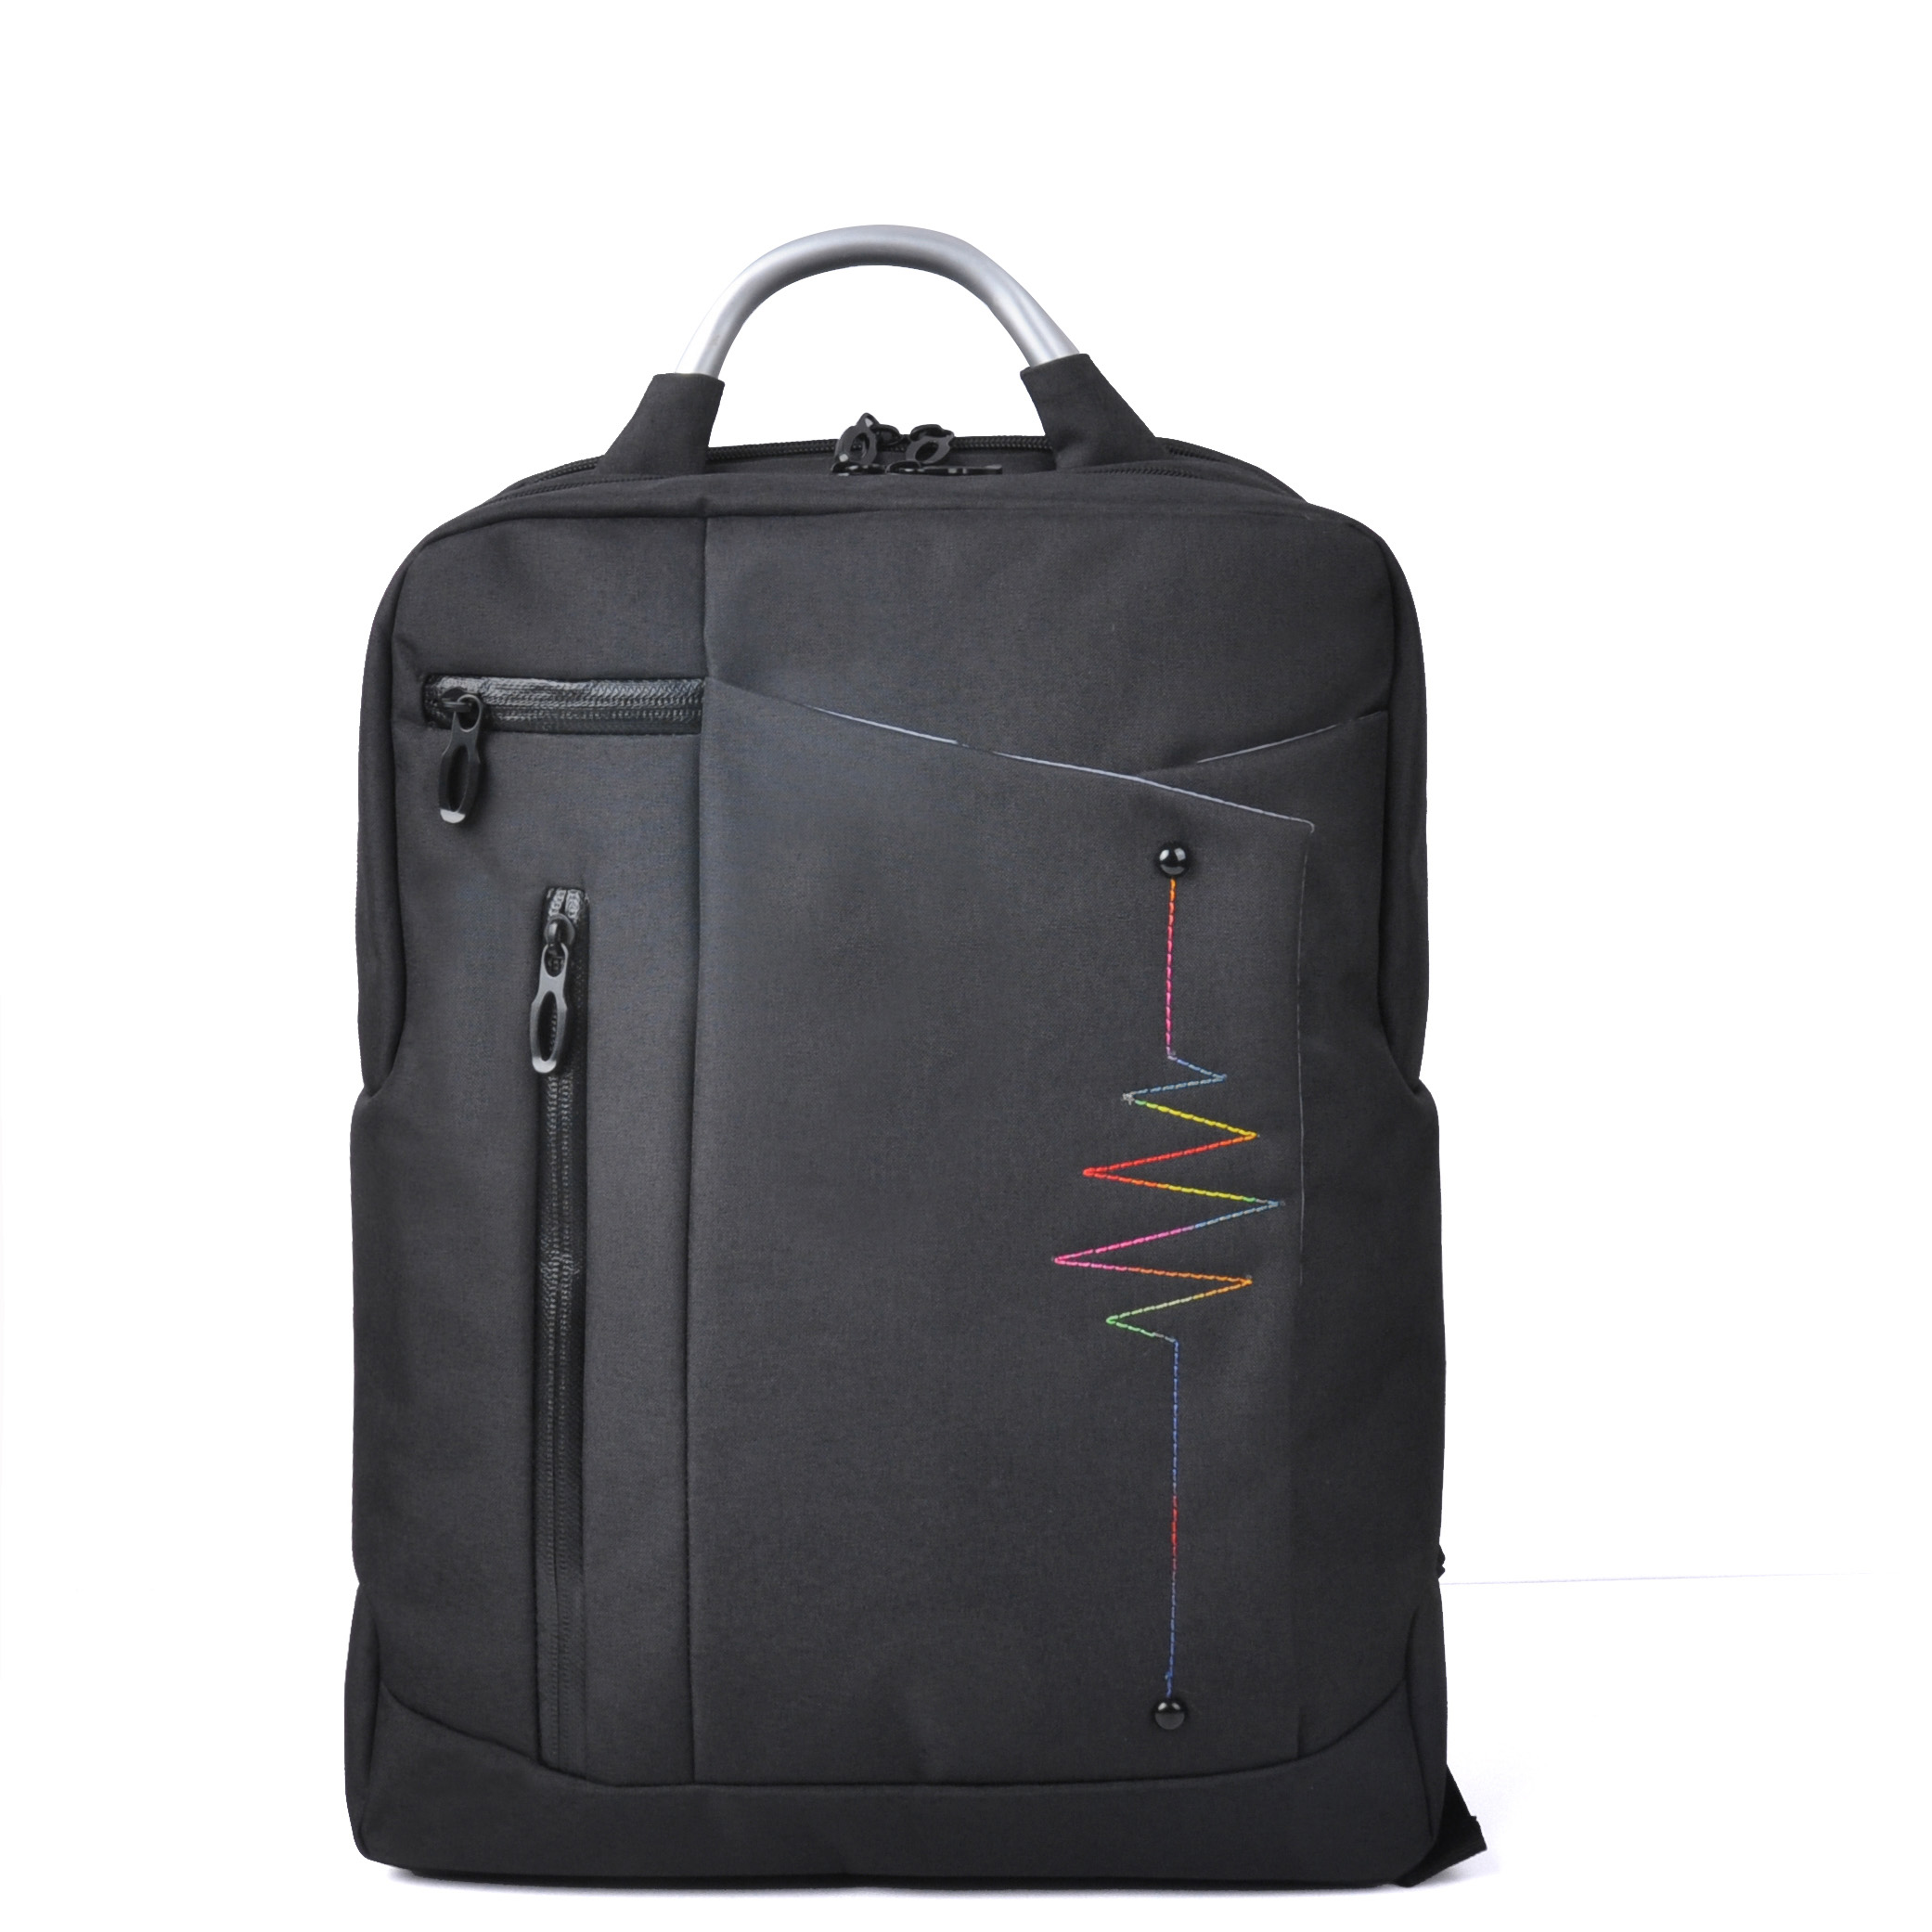 funky laptop bags can fit 15.6 inch laptop